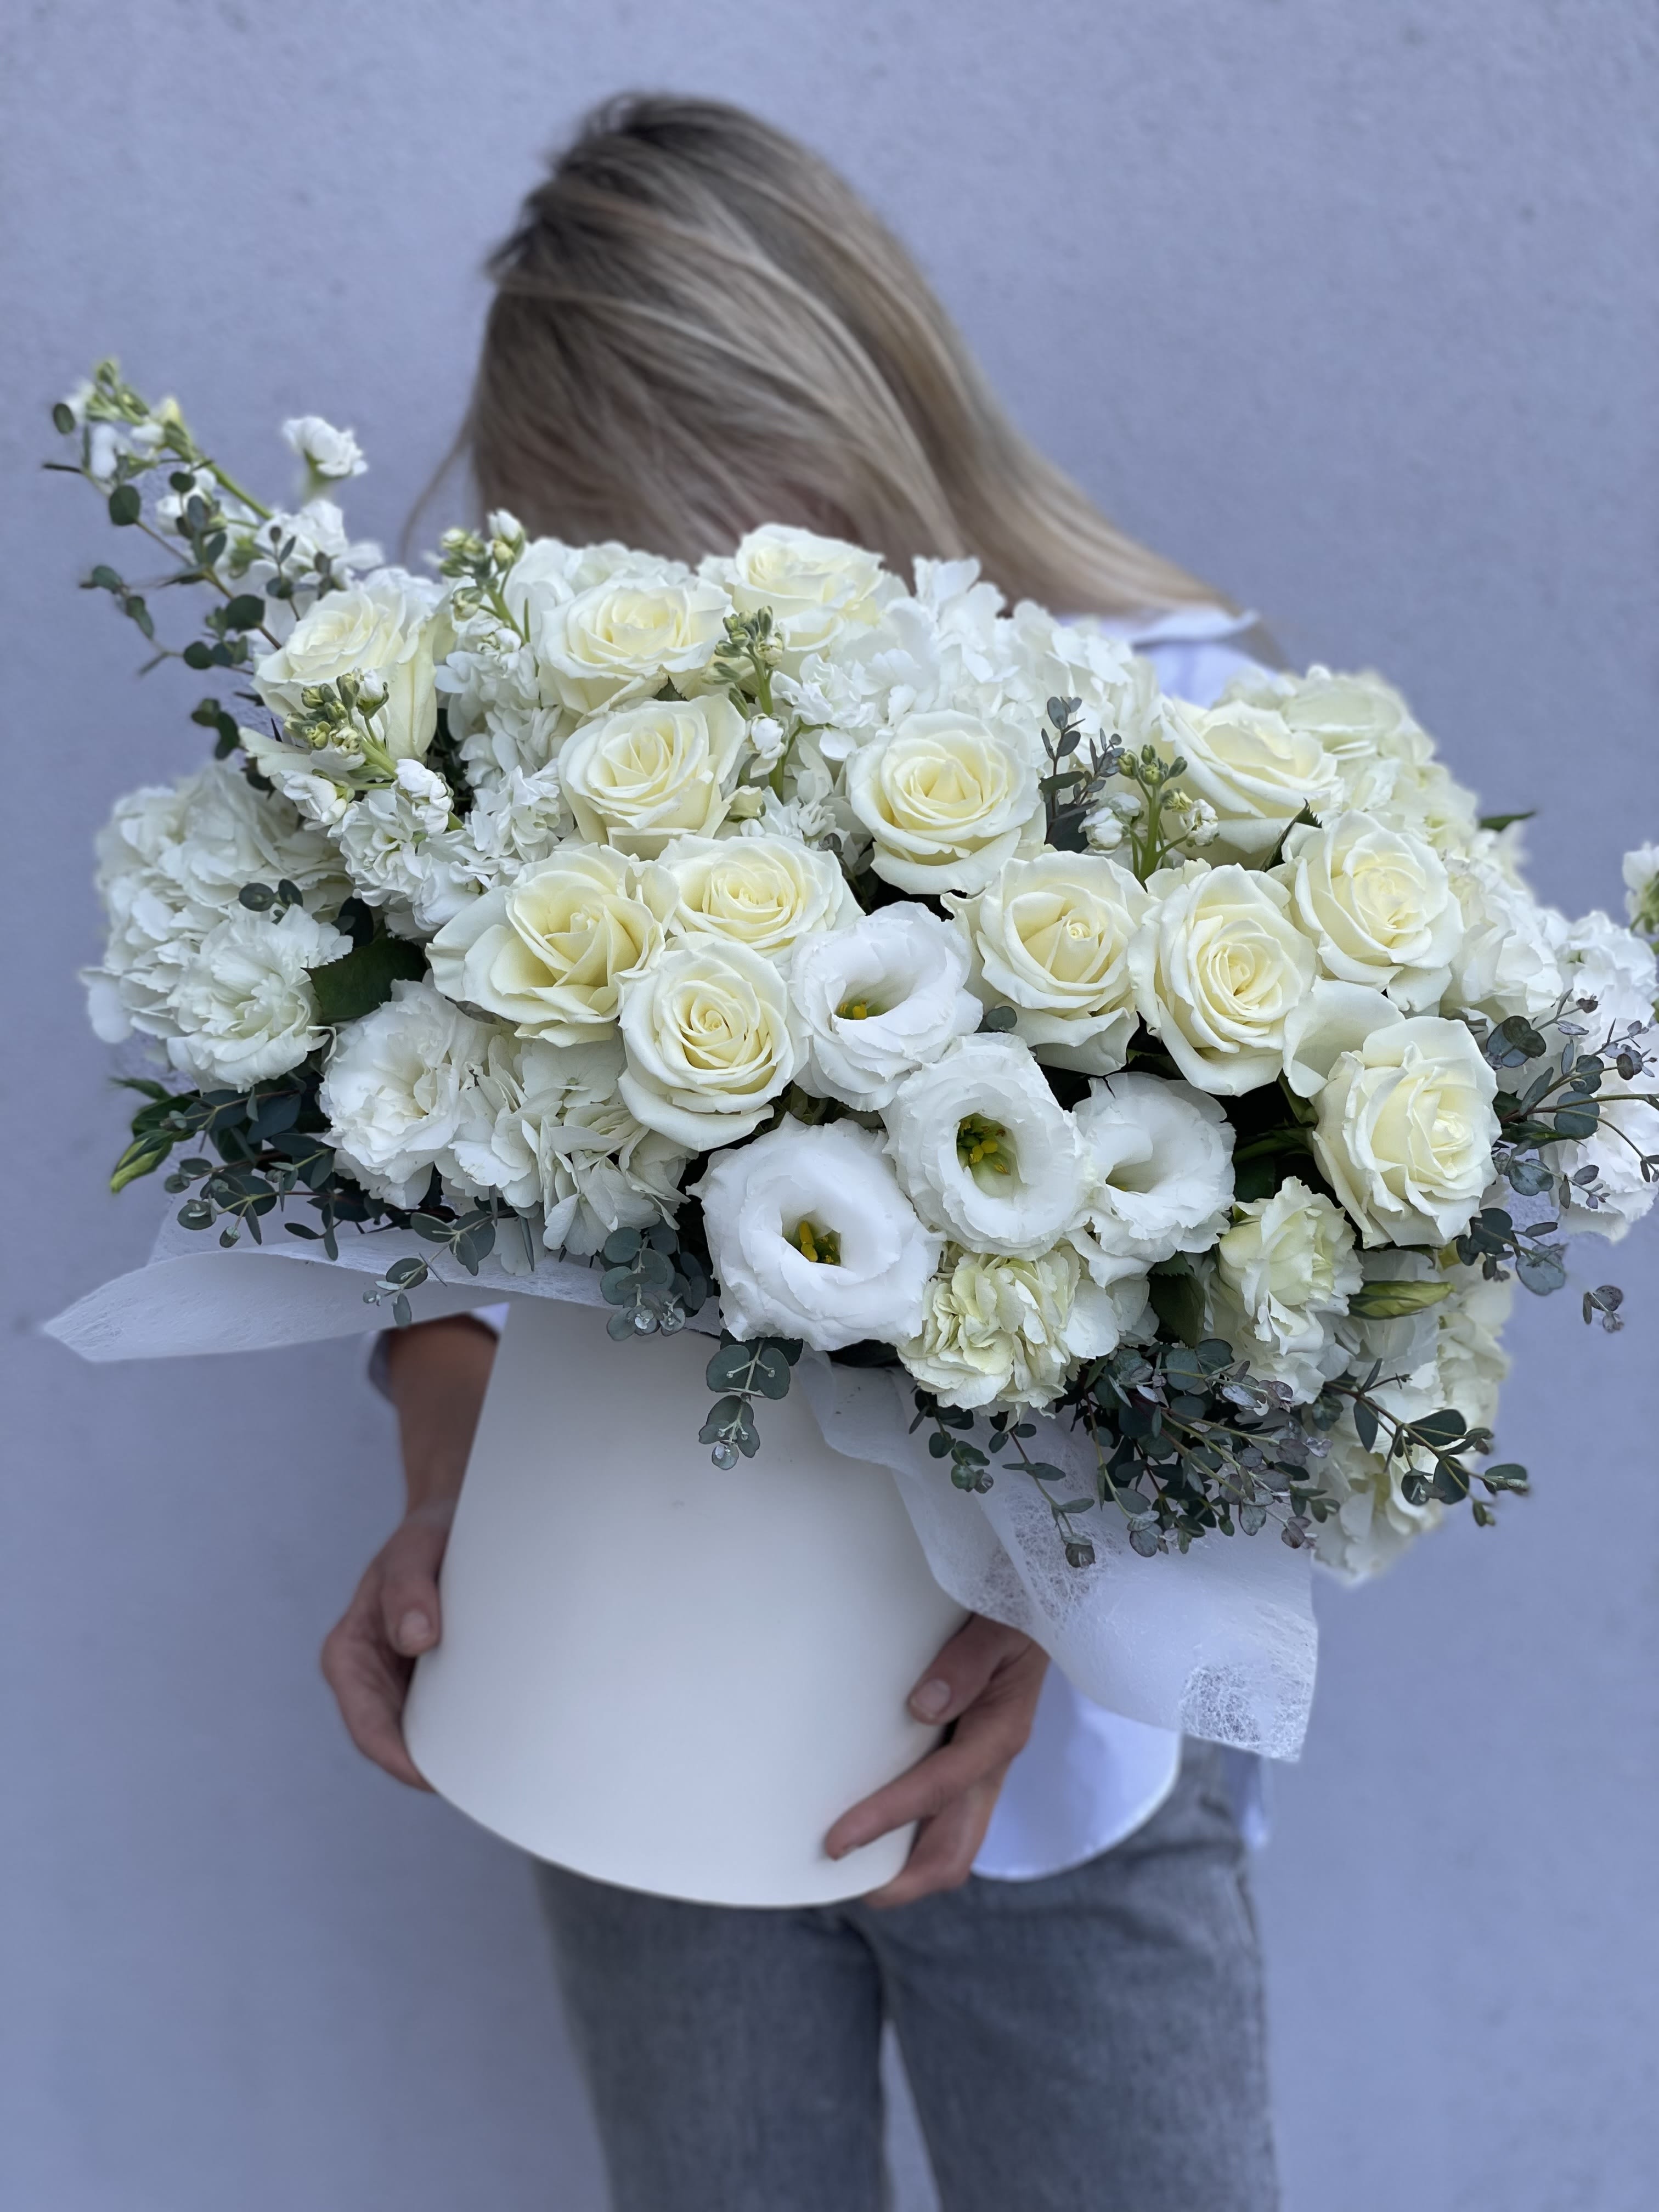 Elegant white box - Gorgeous box with a mix of white flowers! The arrangement was made with beautiful white hydrangeas, beautiful white roses ,amazing white garden roses, white ranunculus,white lisianthus and white stock!